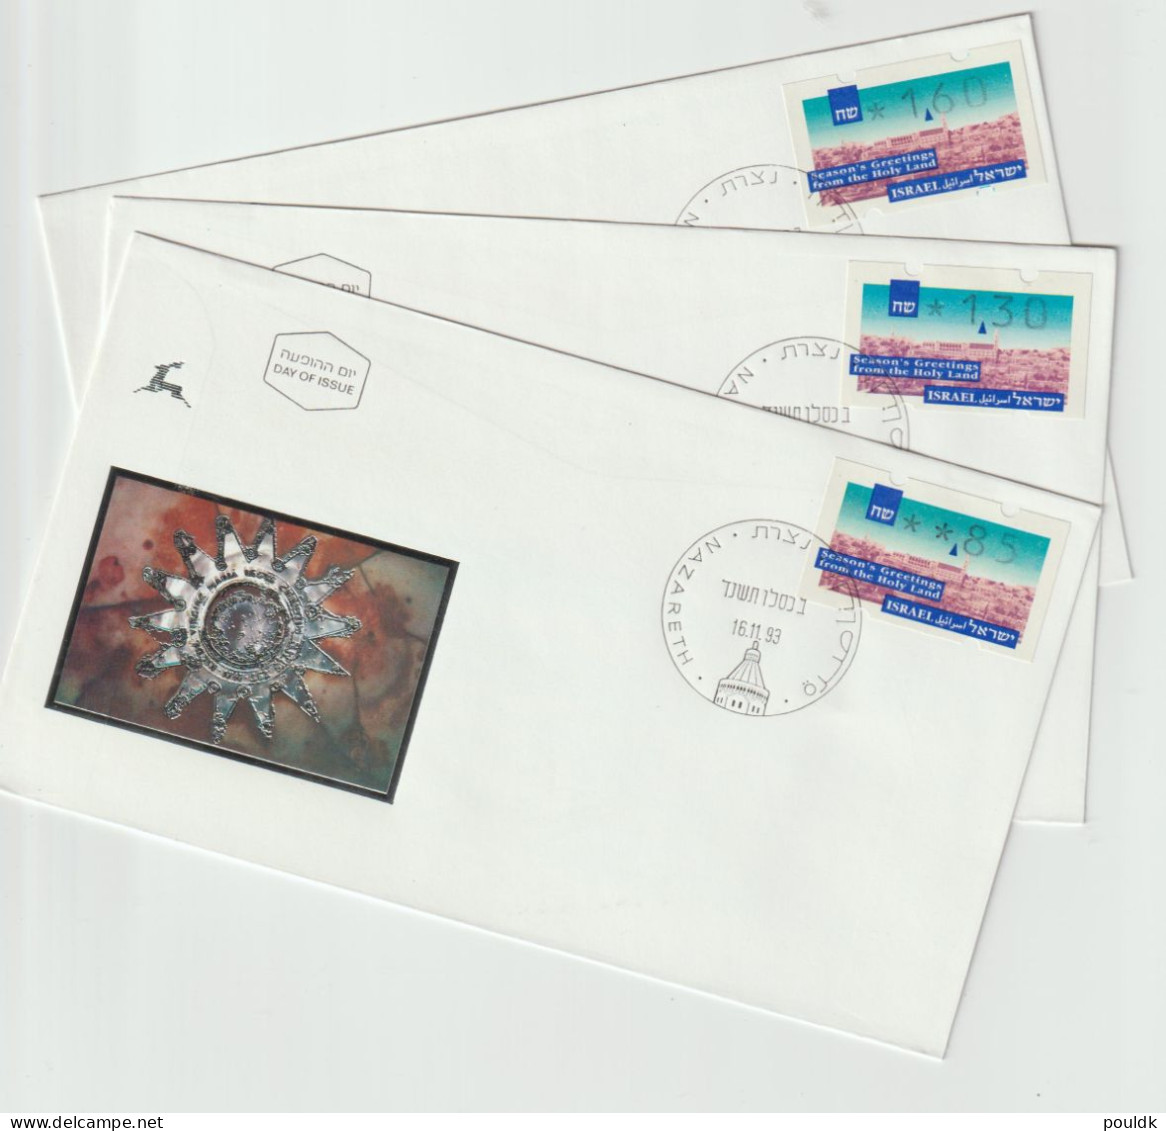 Israel 1993 ATM Christmas - Three FDC From Nazareth. Postal Weight 0,04 Kg. Please Read Sales Conditions Under Image Of - Vignette [ATM]